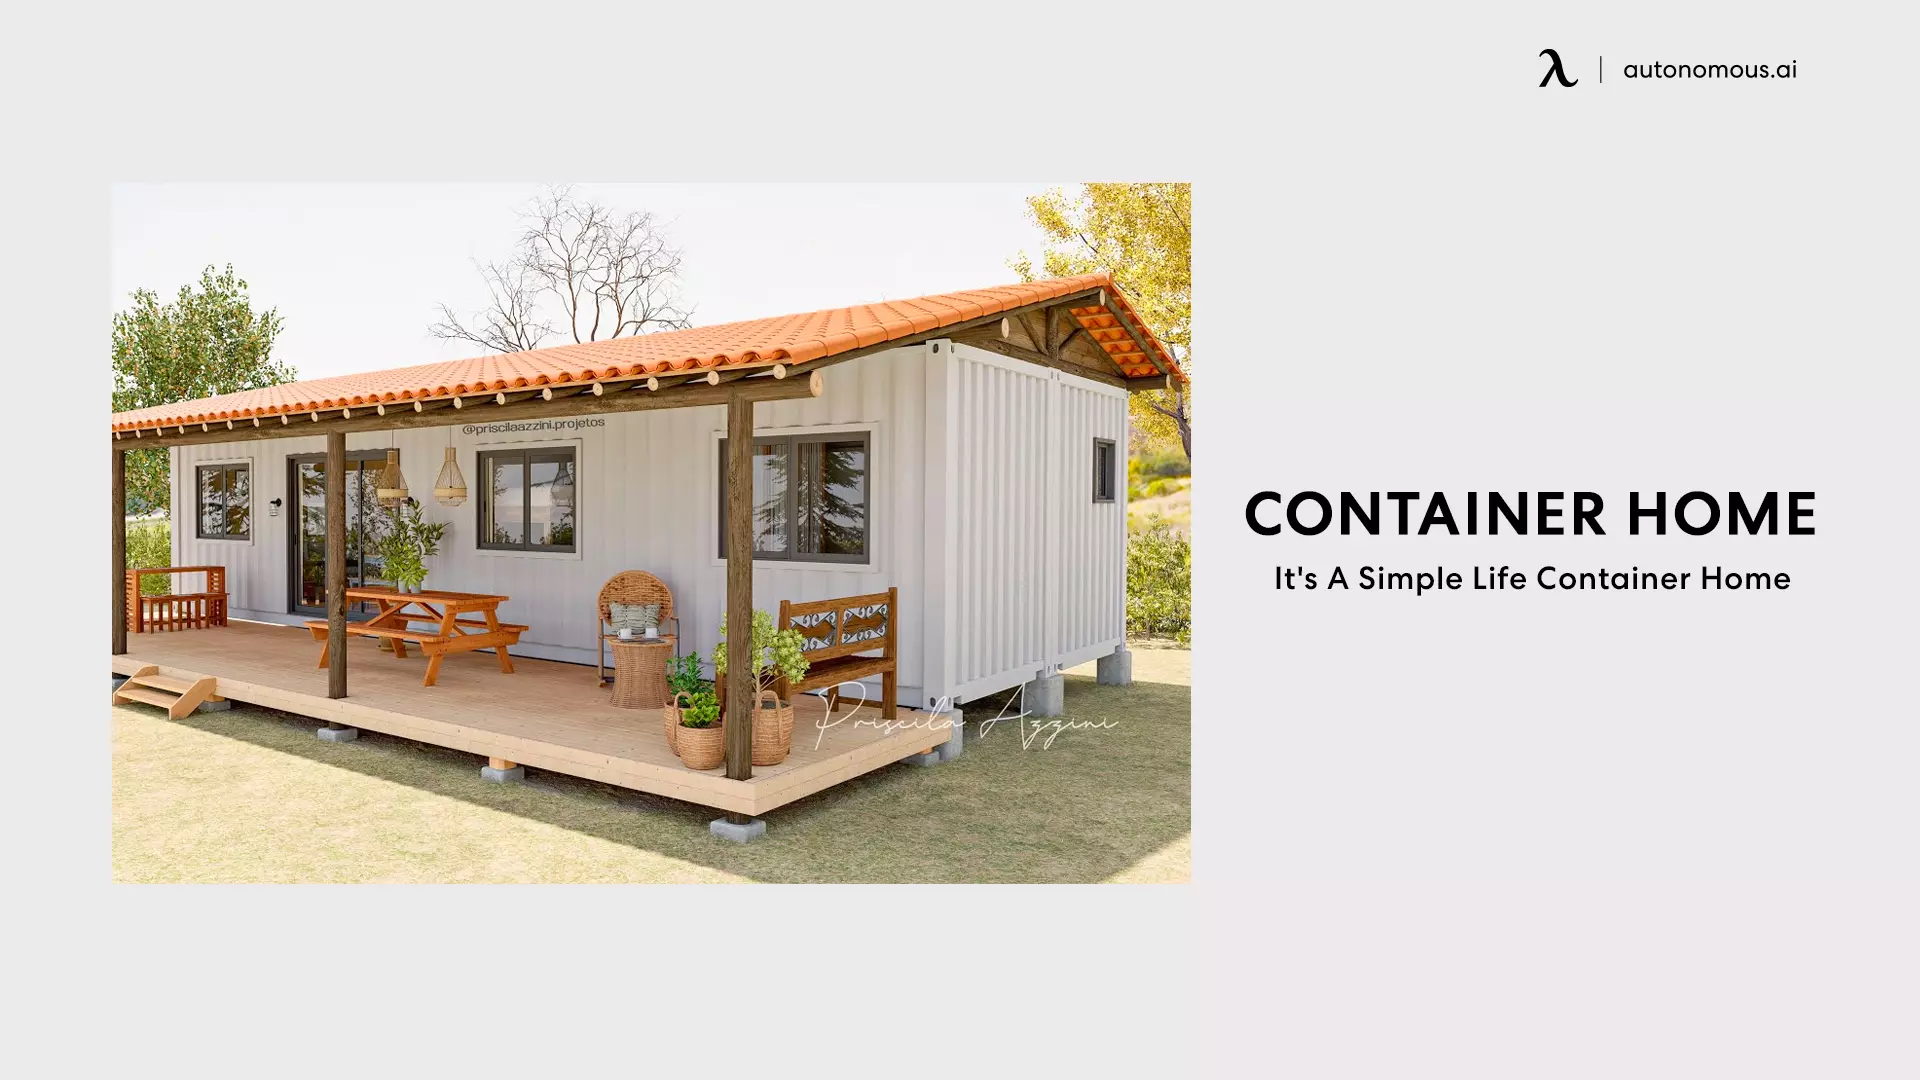 It's A Simple Life Container Home